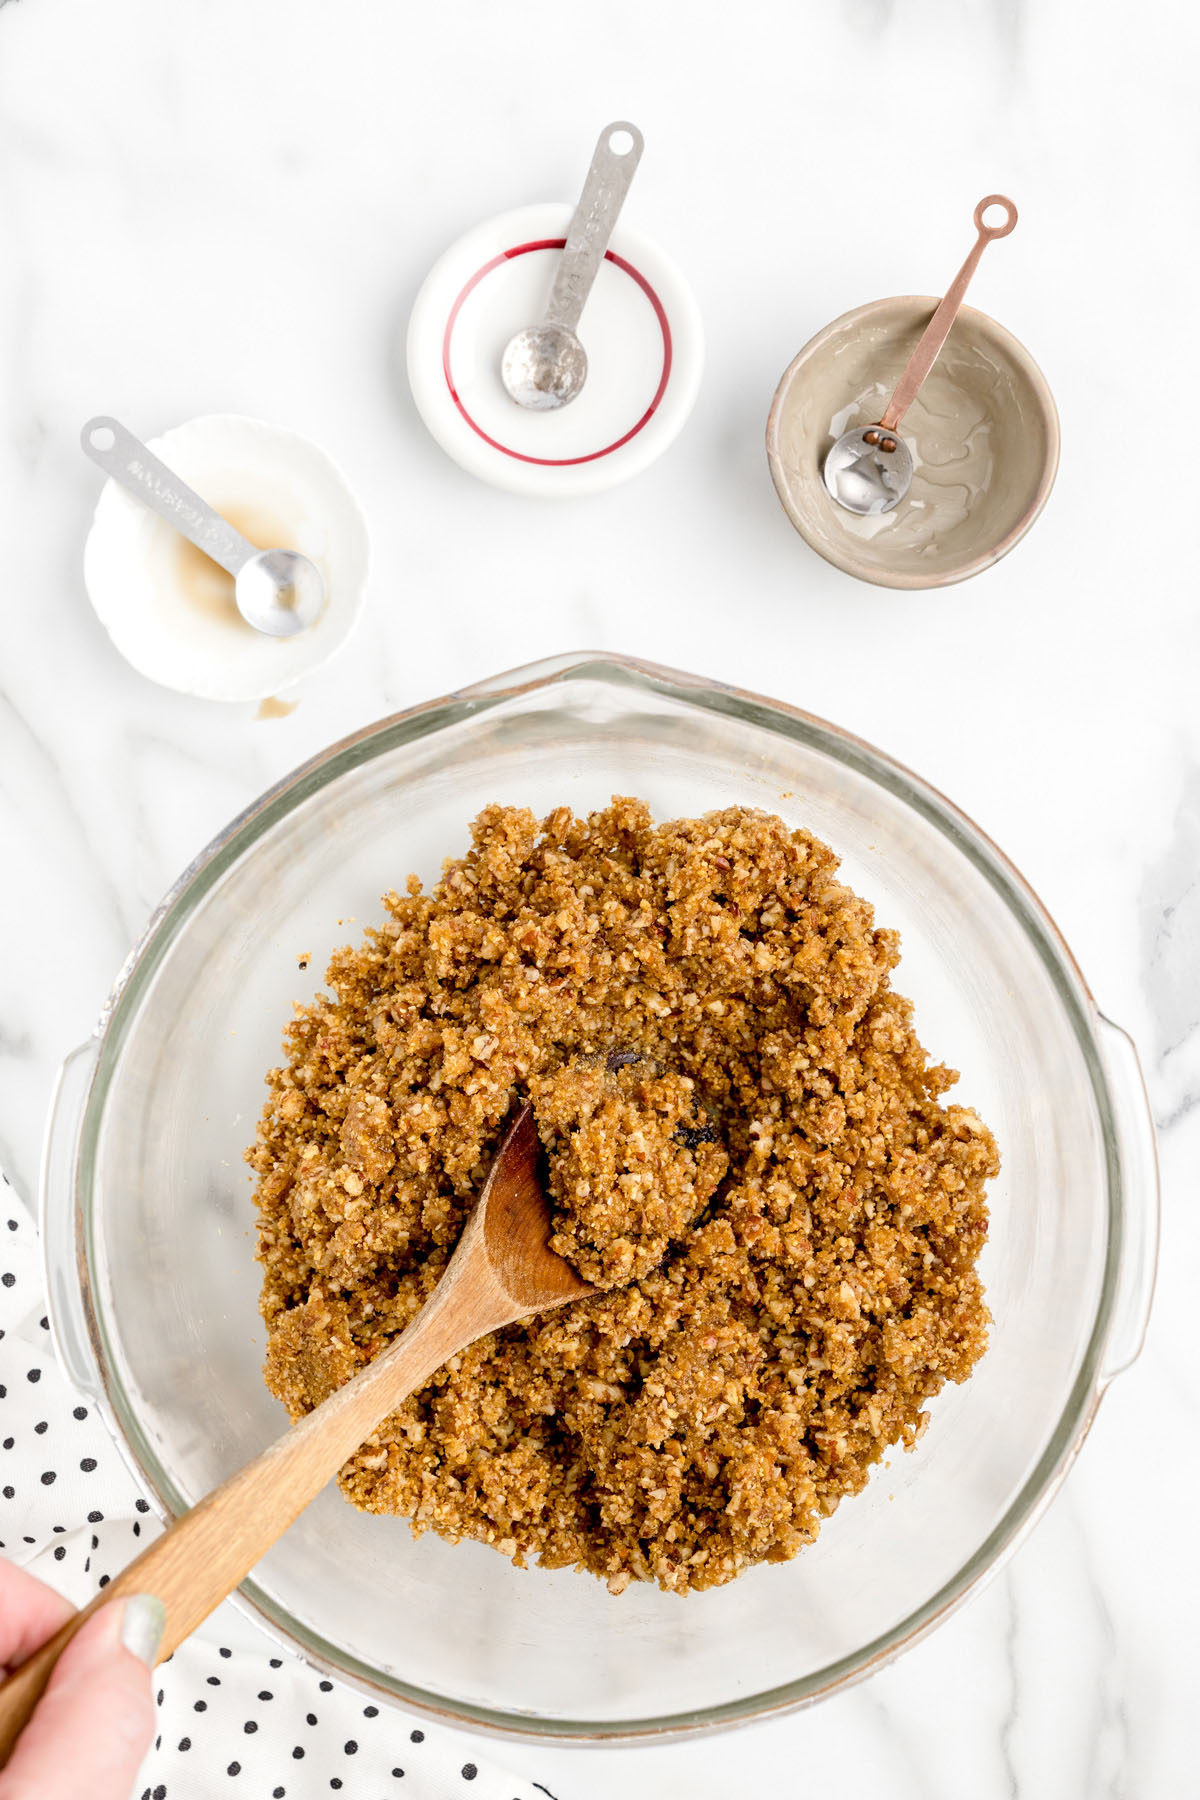 Mix together chopped pecans, graham cracker crumbs, brown sugar, maple syrup, karo syrup, melted butter, almond and rum extracts